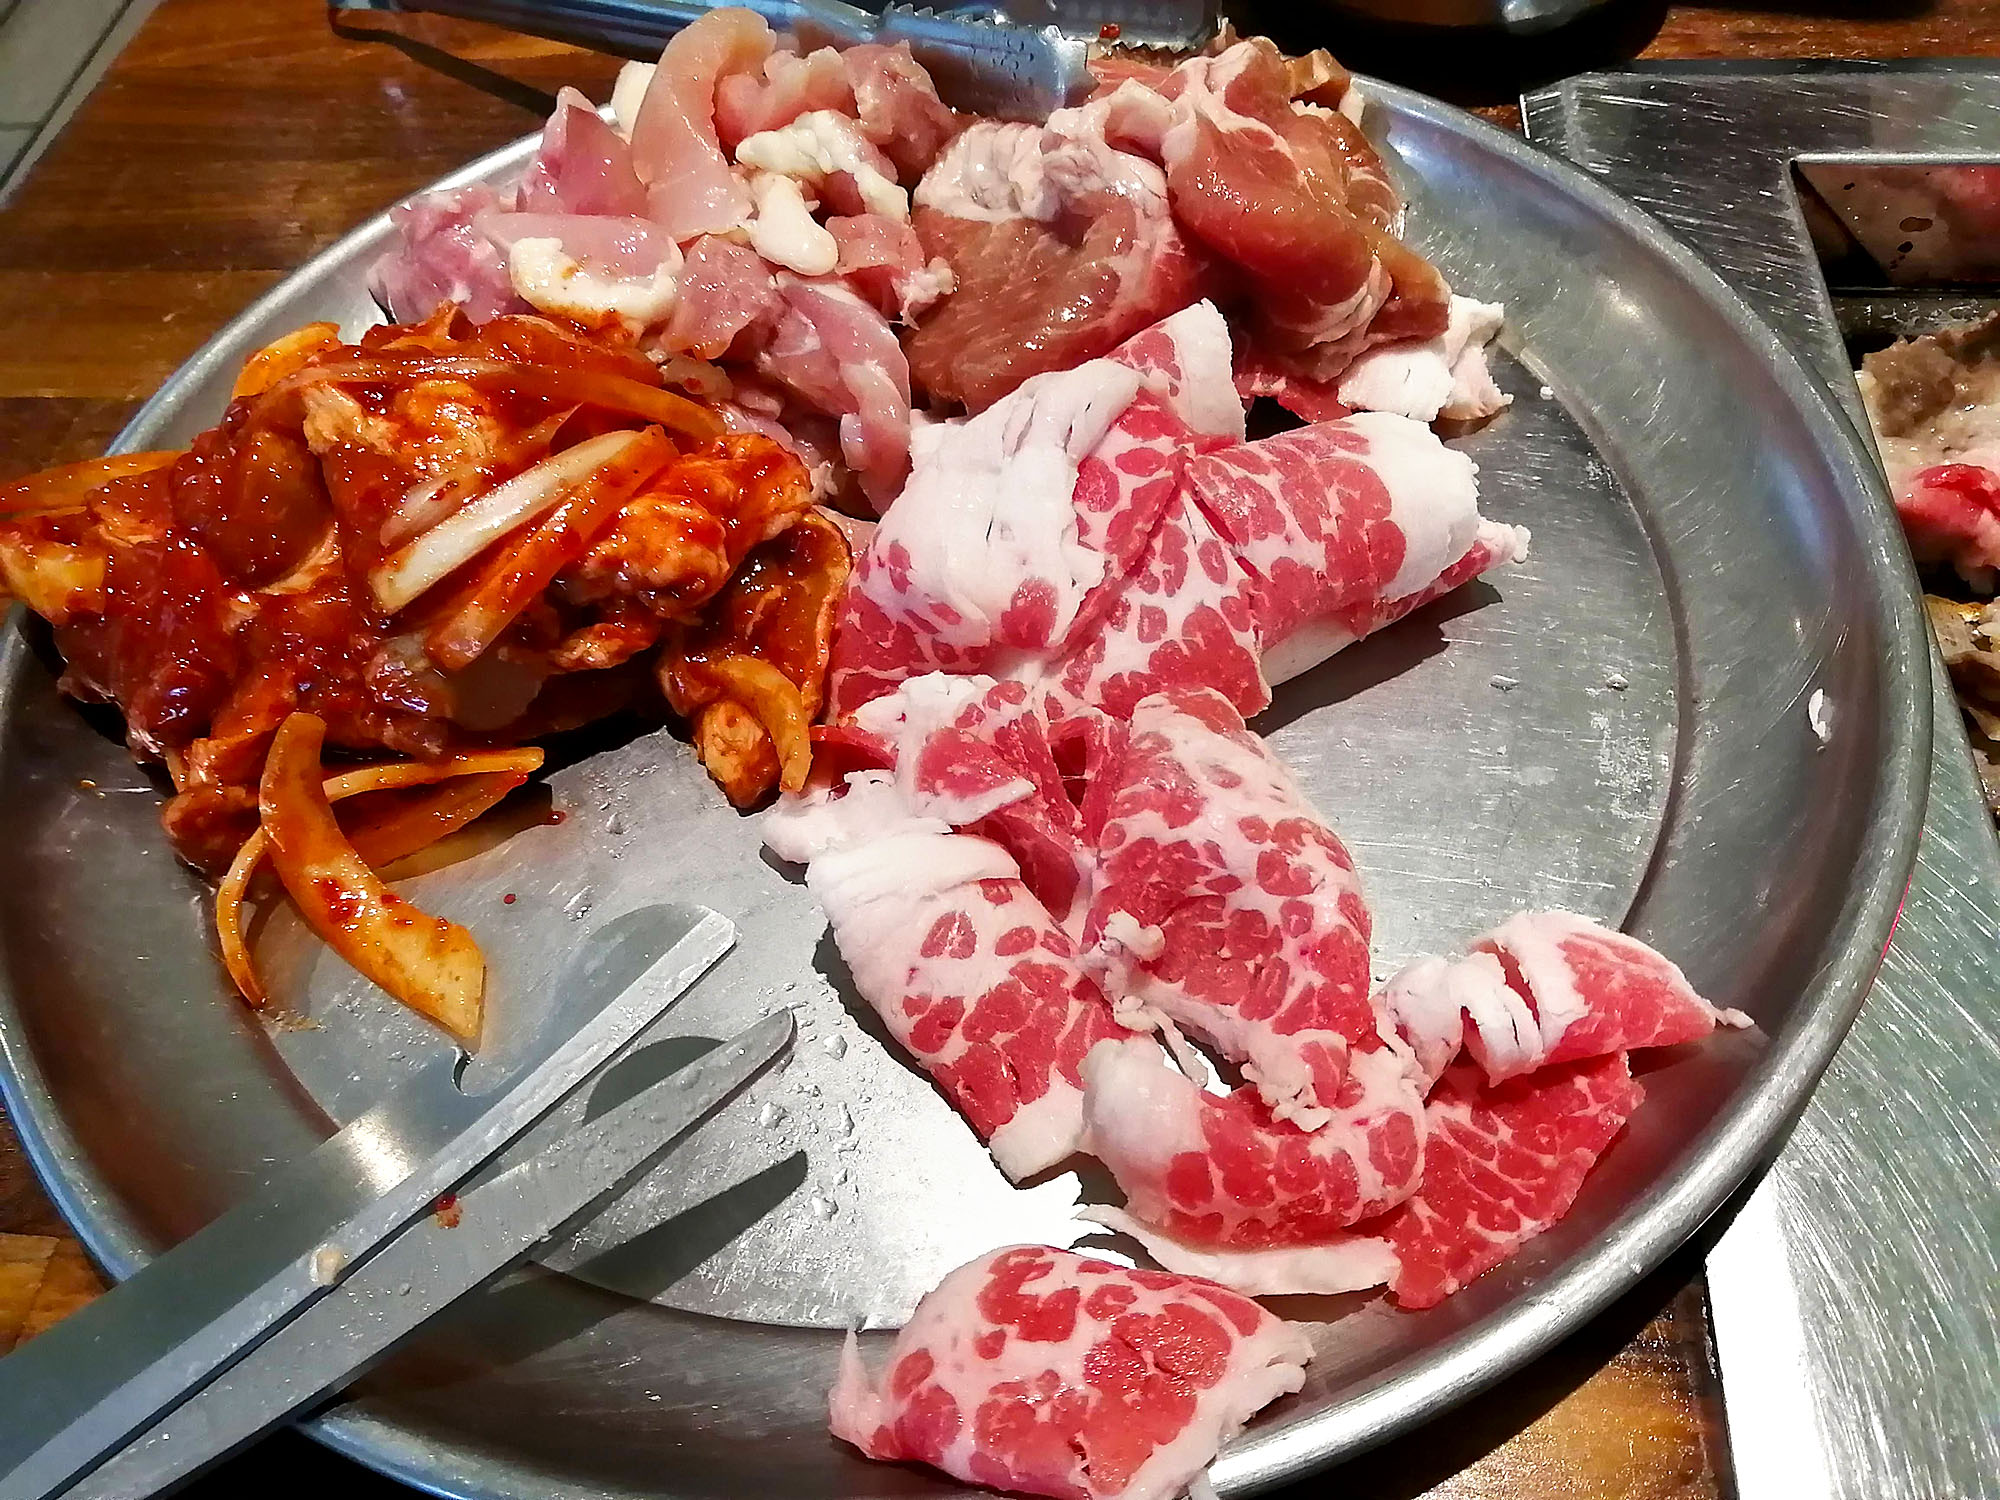  An image of a large platter with four different kinds of raw meat with a pair of large scissors visible. Photo by Paul Young.